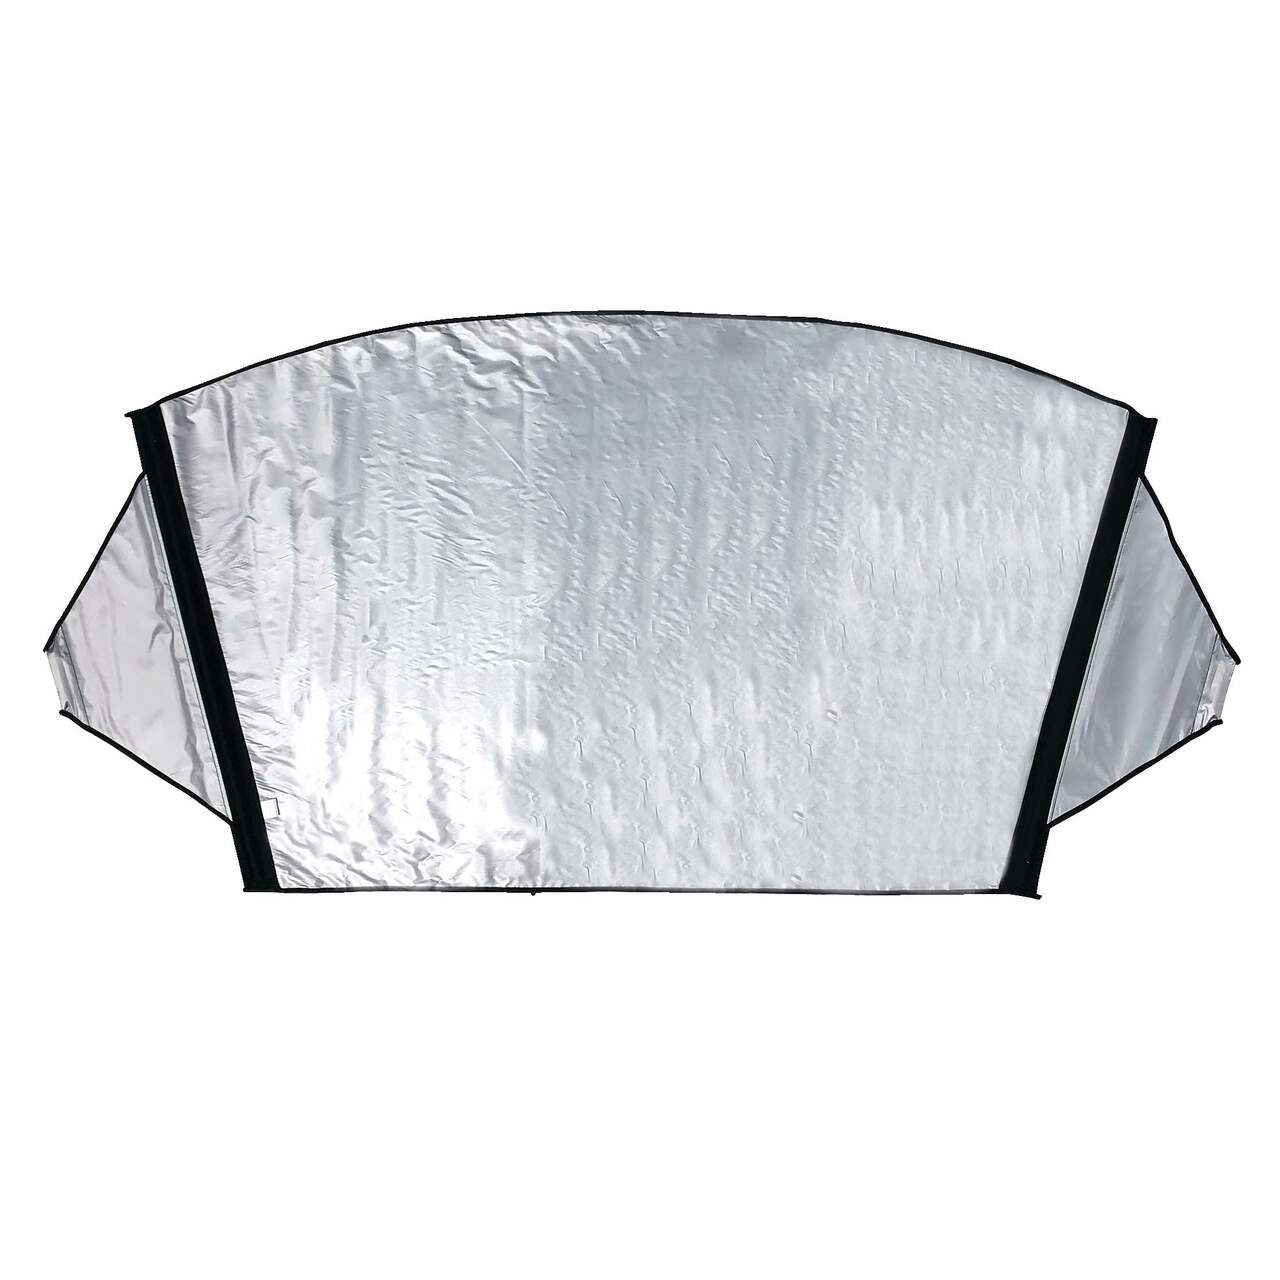 AstroAI Car Windshield Snow Cover, Car Snow Cover, Winter Windshield Cover